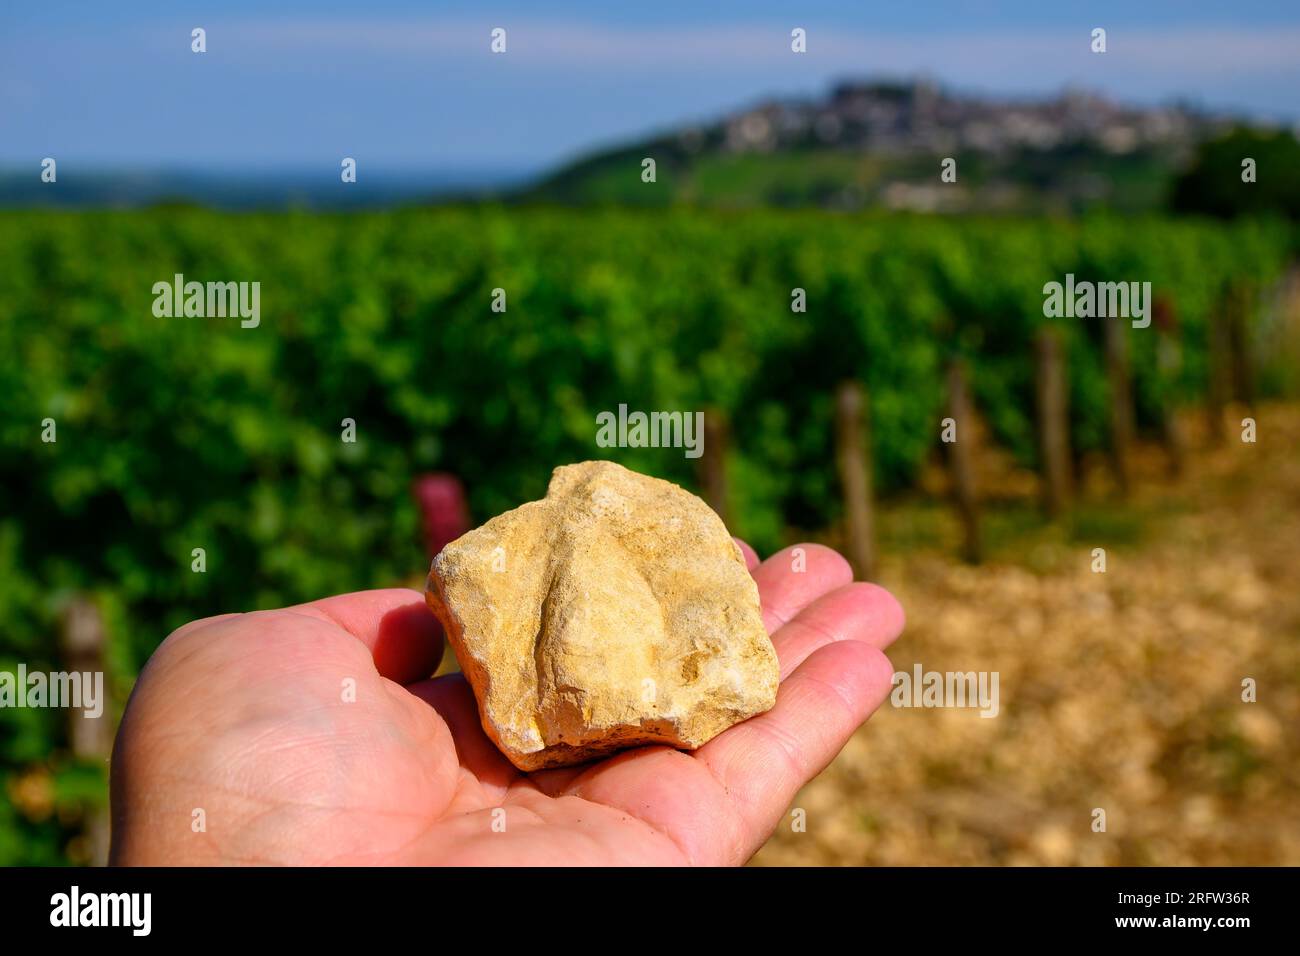 Example of terres blanches clay-limestone white soils on vineyards around Sancerre wine making village, rows of sauvignon blanc grapes on hills, Cher, Stock Photo